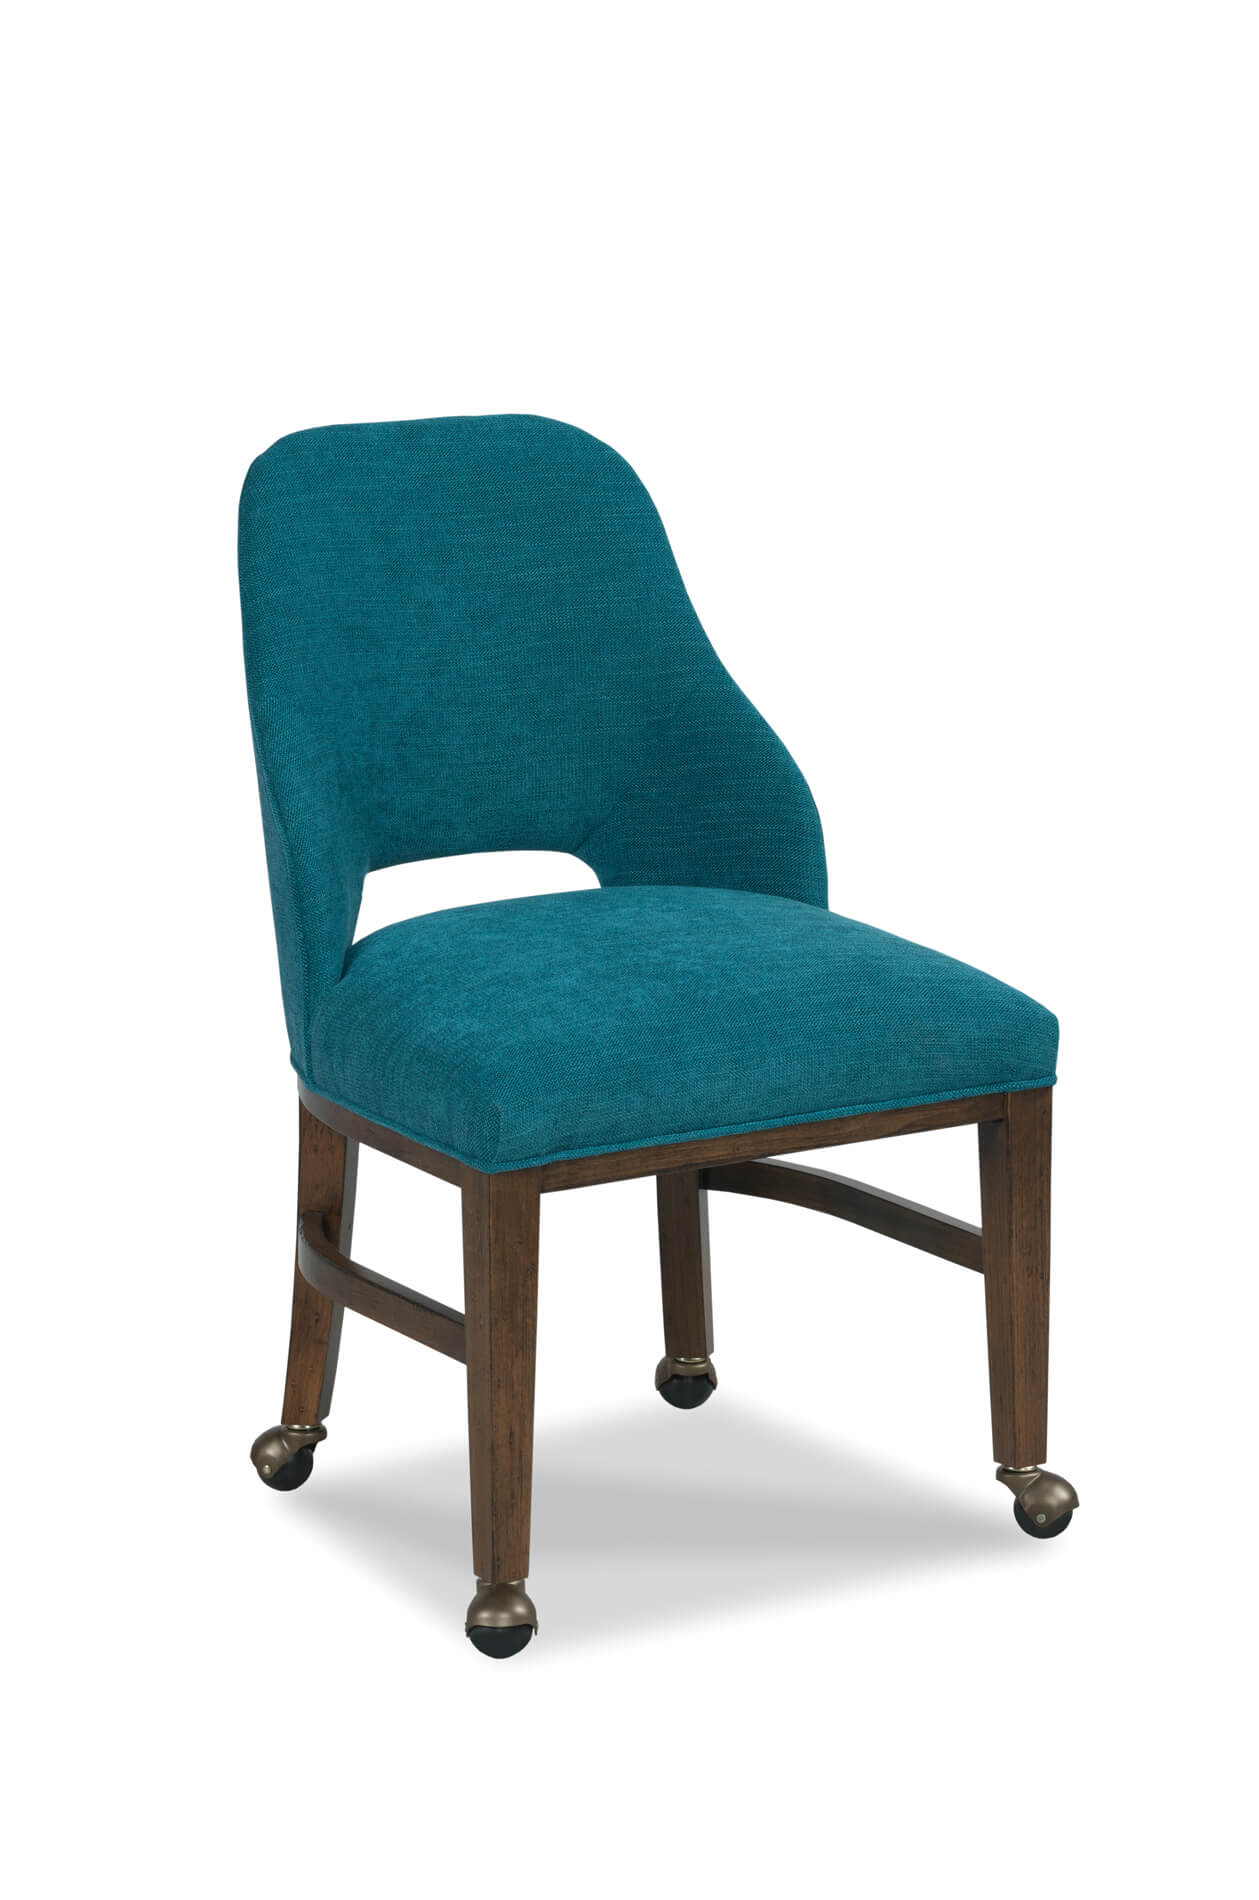 Fairfield's Darien Upholstered Dining Chair